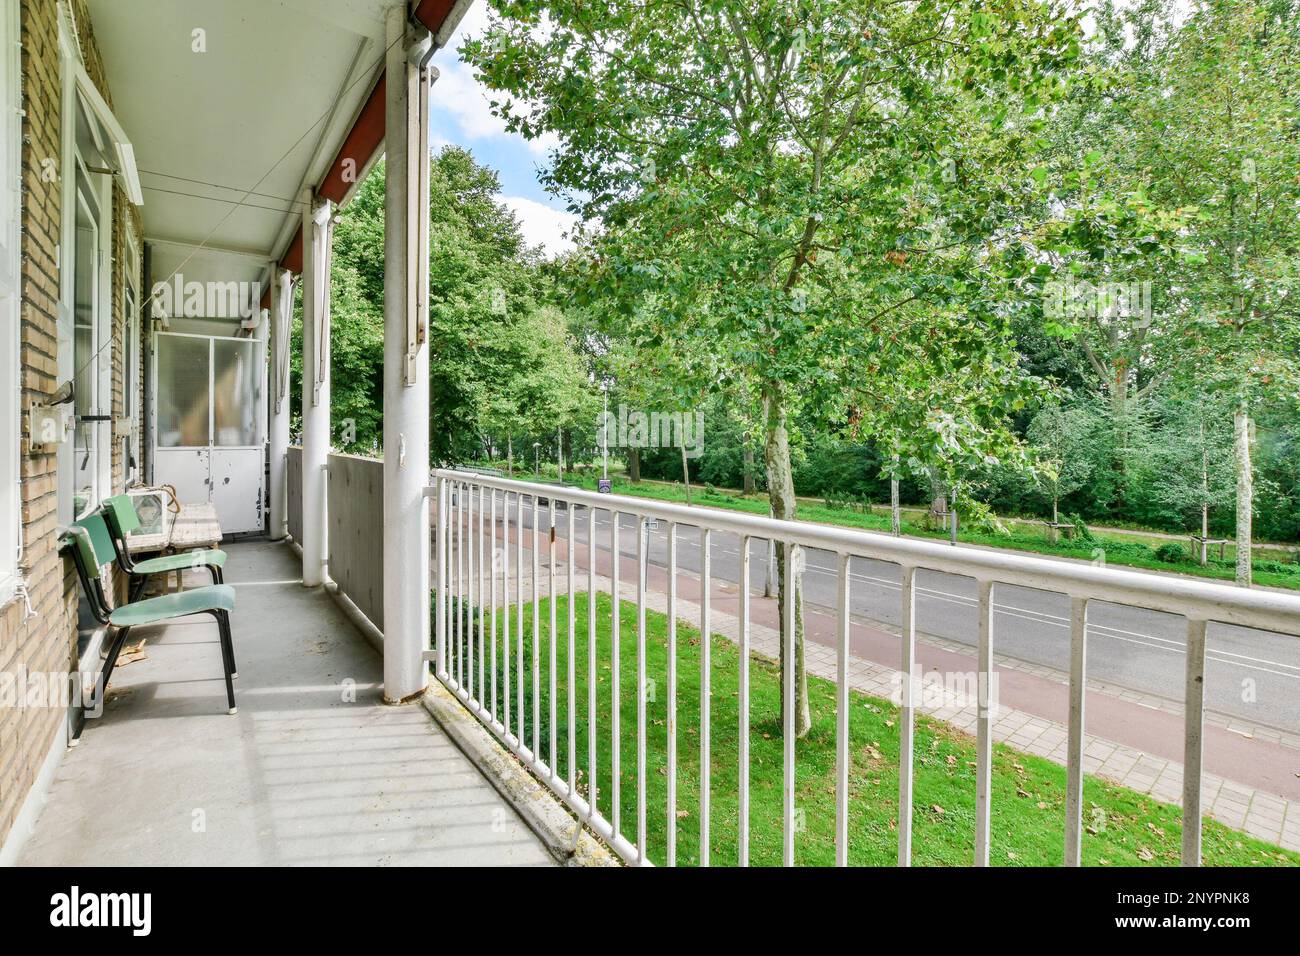 Amsterdam, Netherlands - 10 April, 2021: a porch with chairs and trees on the side walk way, looking out onto the street in front of the house Stock Photo